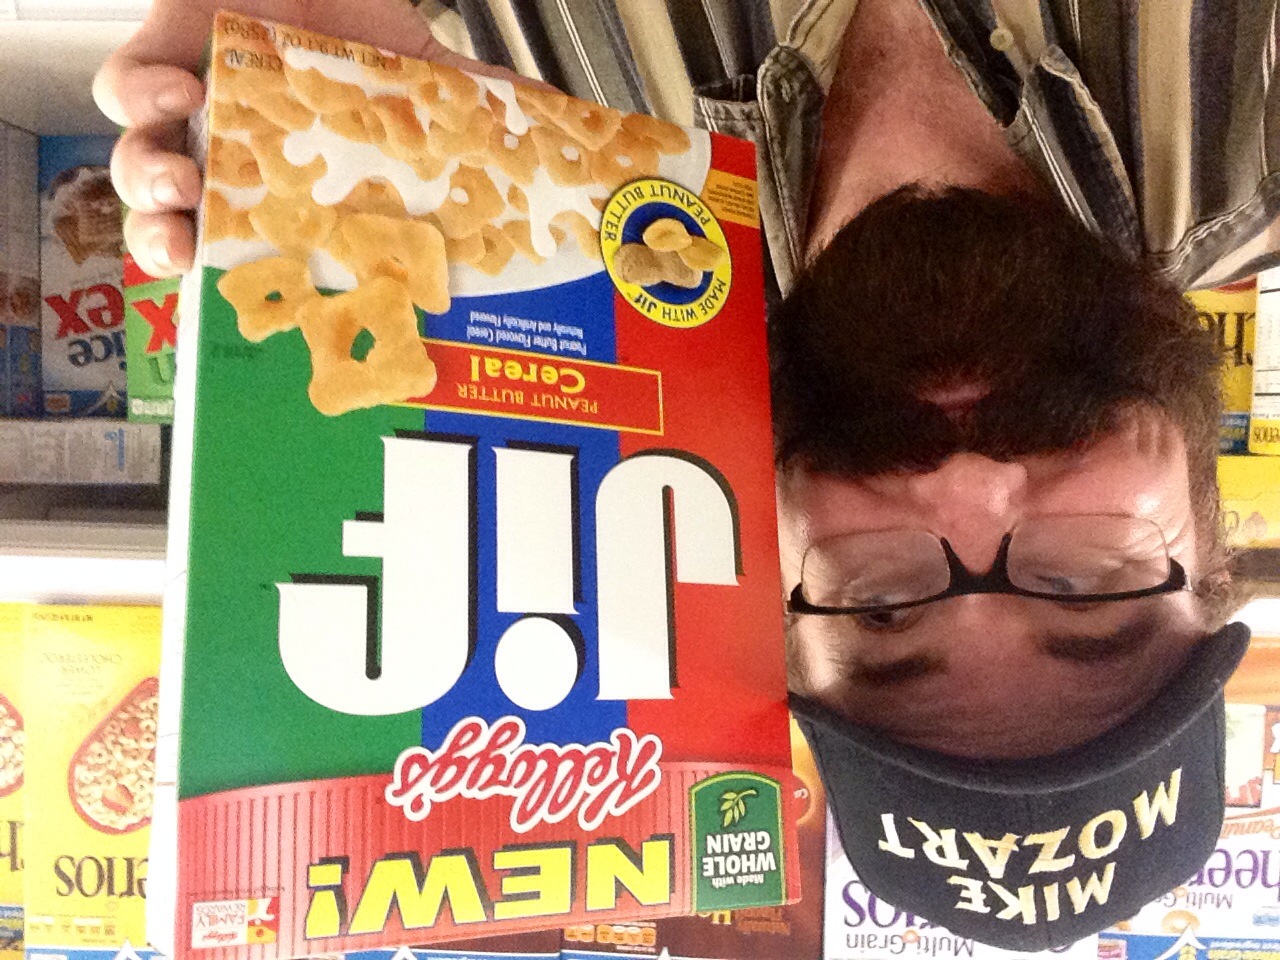 a man holds up a box of cereal and wears glasses